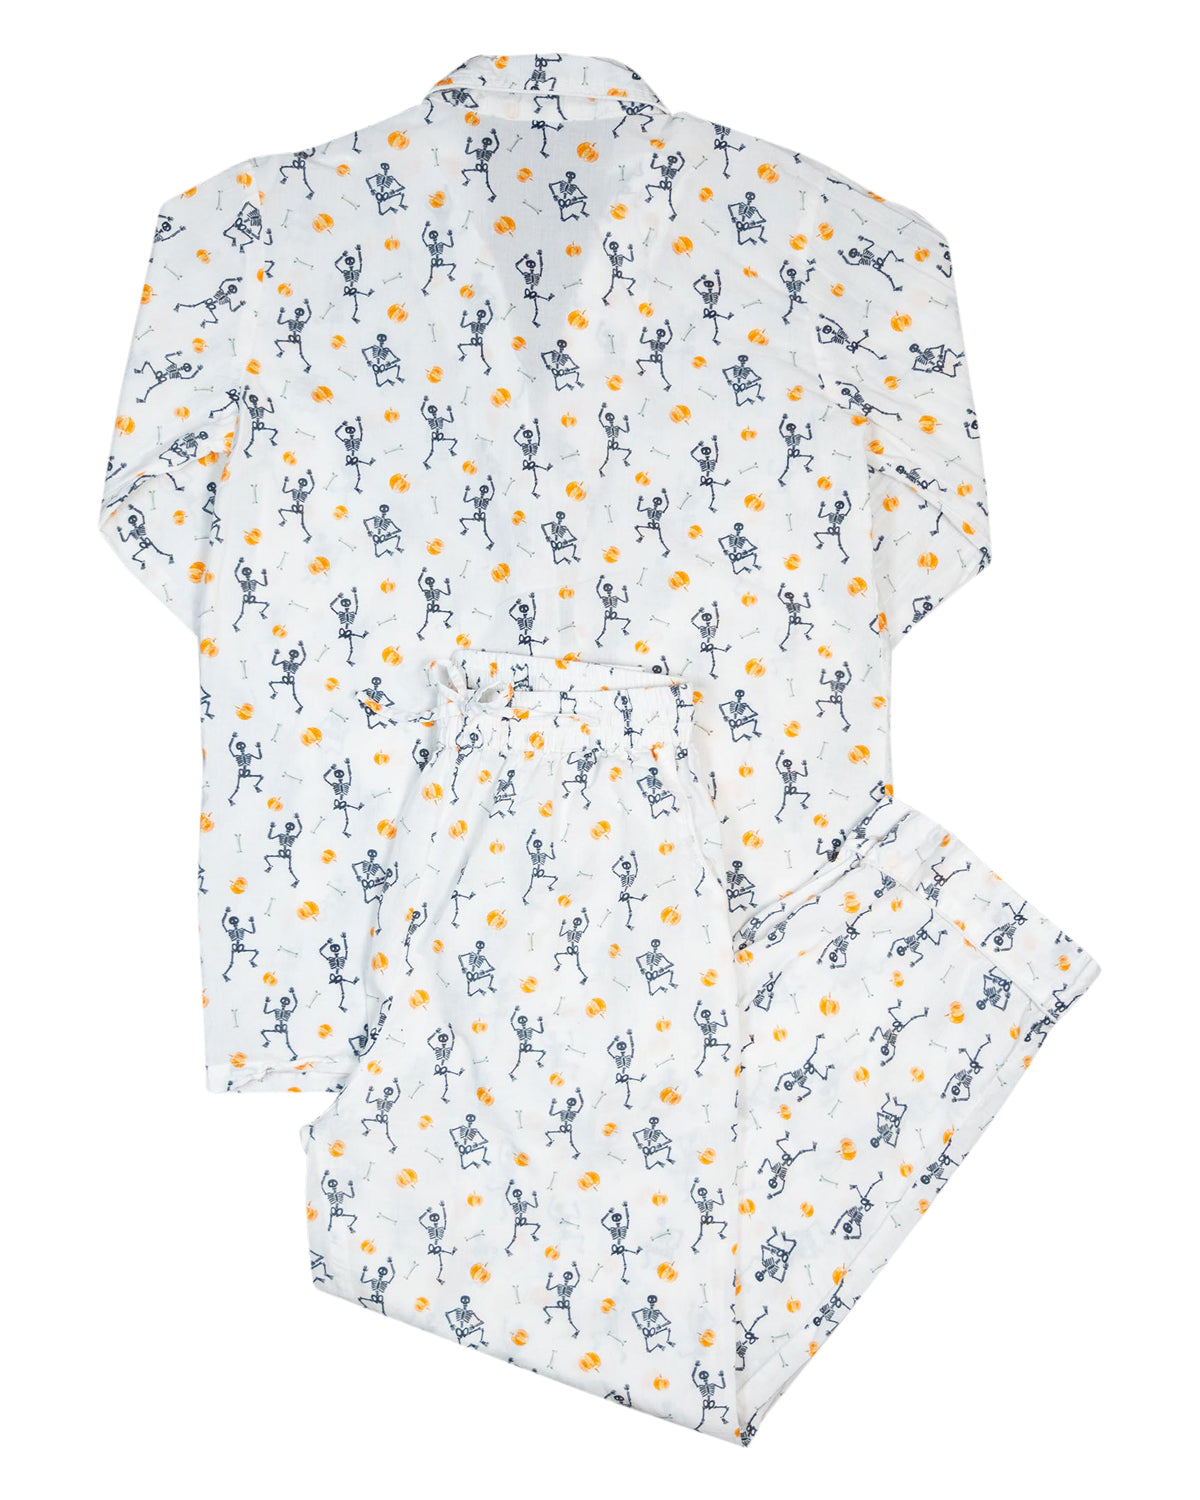 Dancing Skeleton Button Down Pajamas for Adult-FINAL SALE